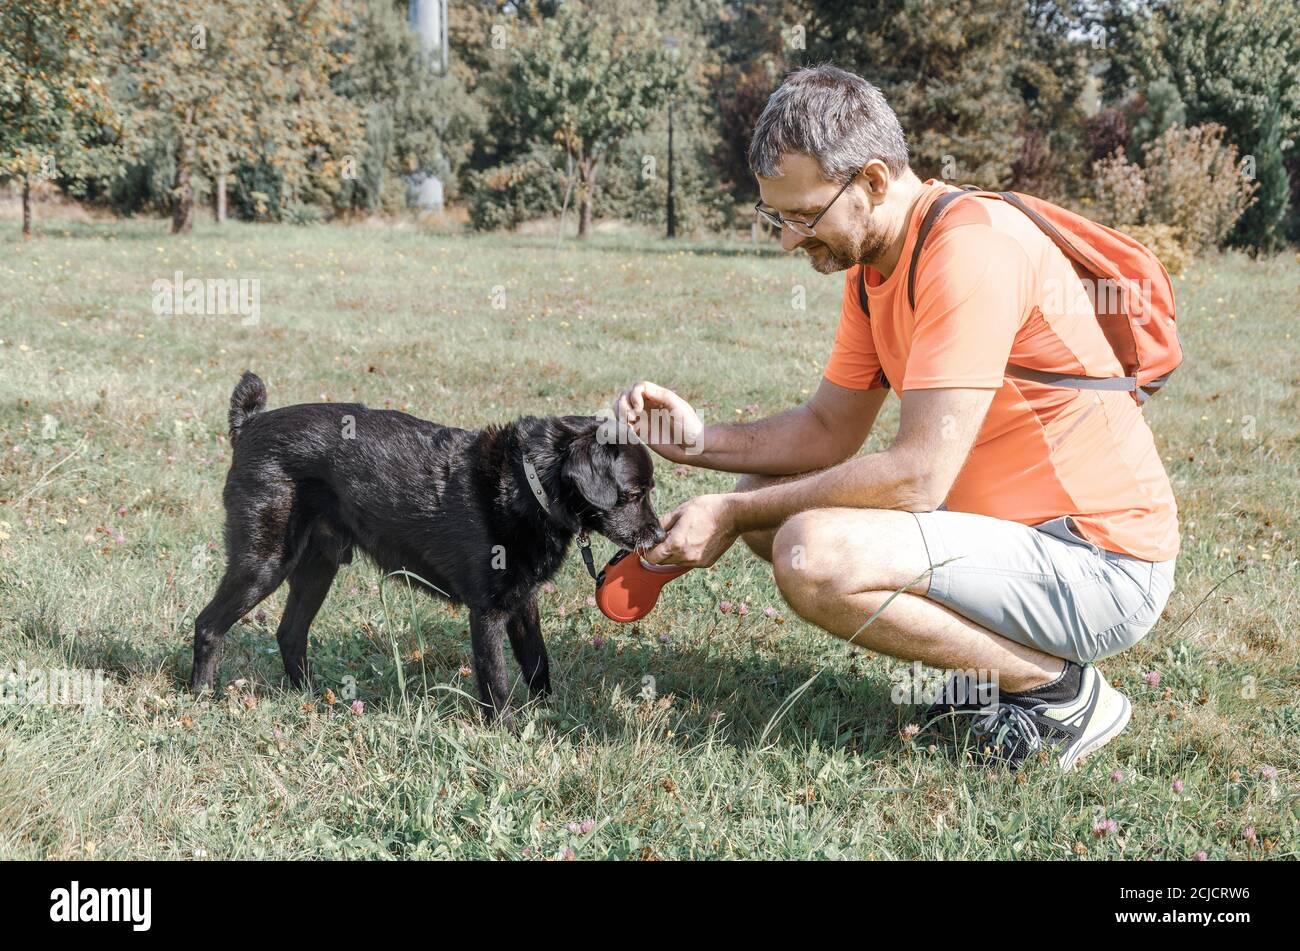 A middle aged man crouching to stroke his dog while walking outdoors Stock Photo